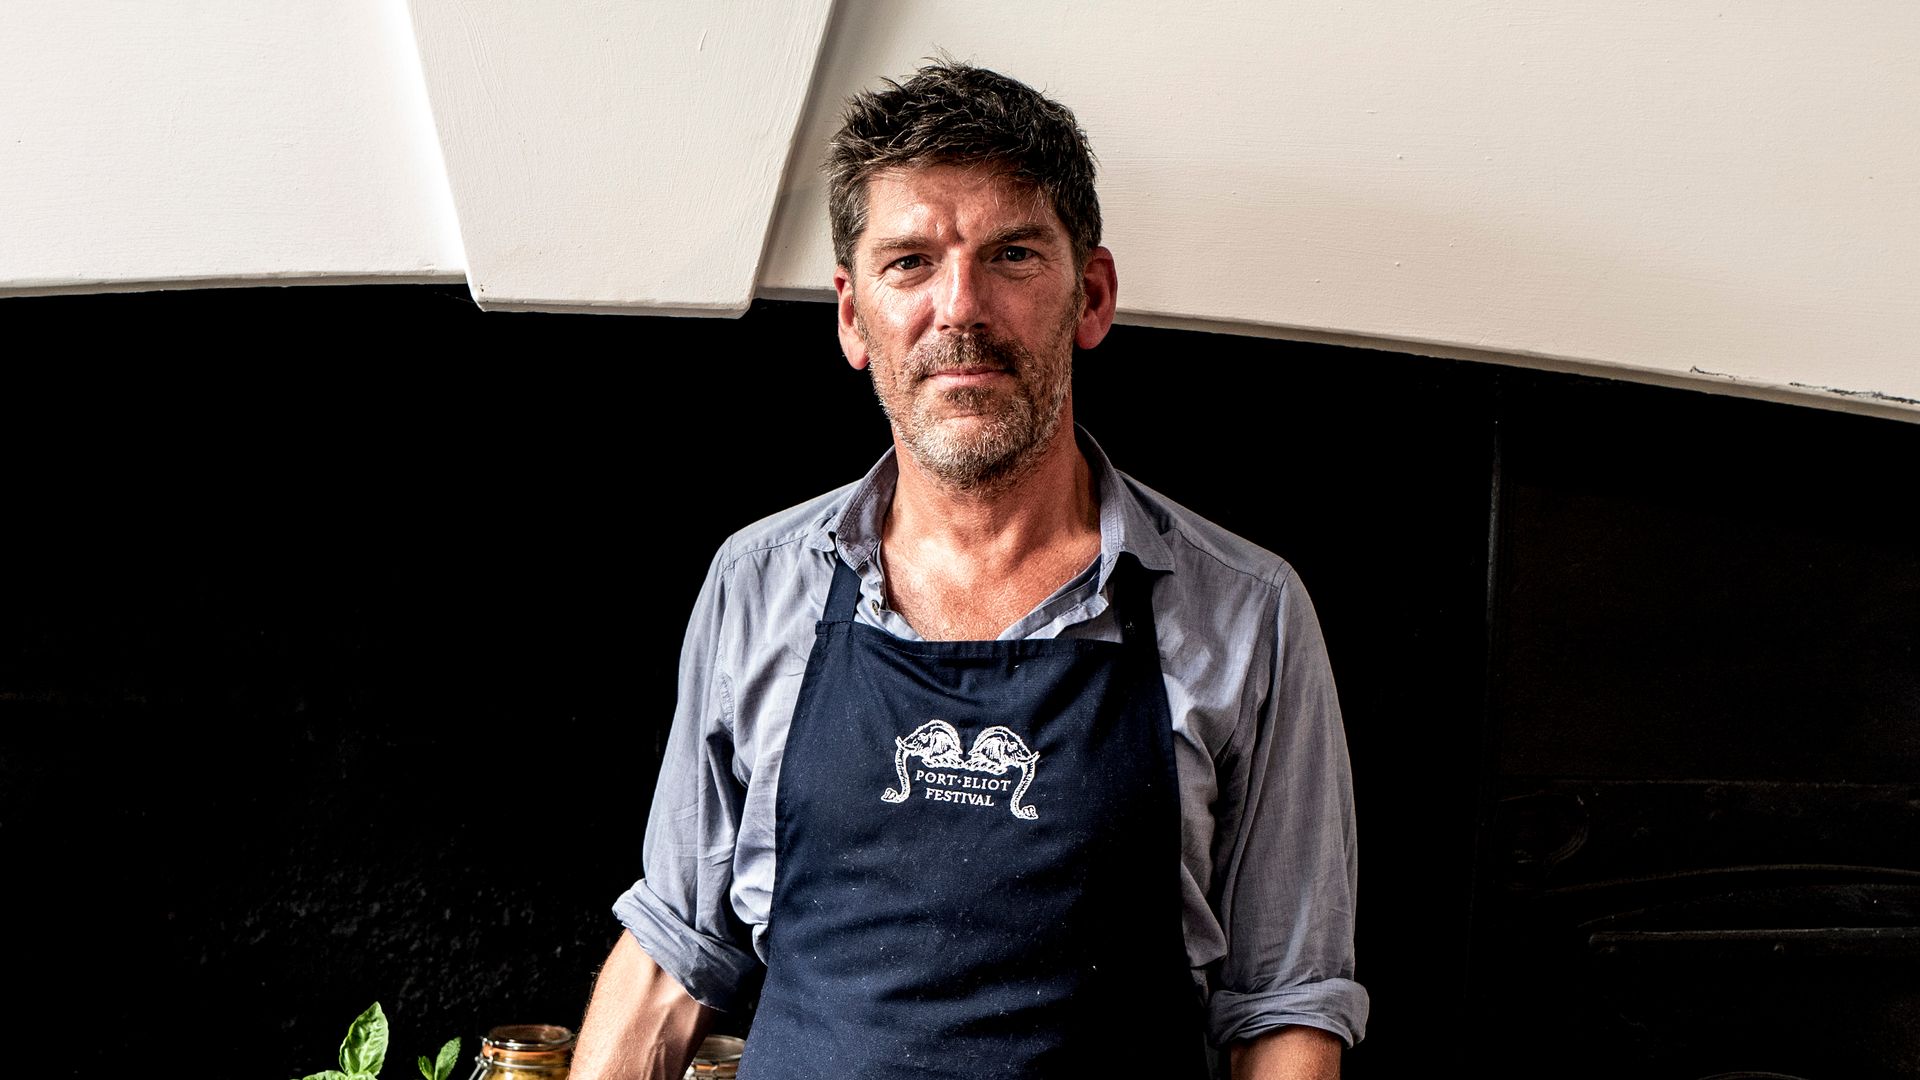 Russell Norman, restaurant owner, TV star, chef and founder of the Polpo and Brutto restaurants, has passed away aged 57